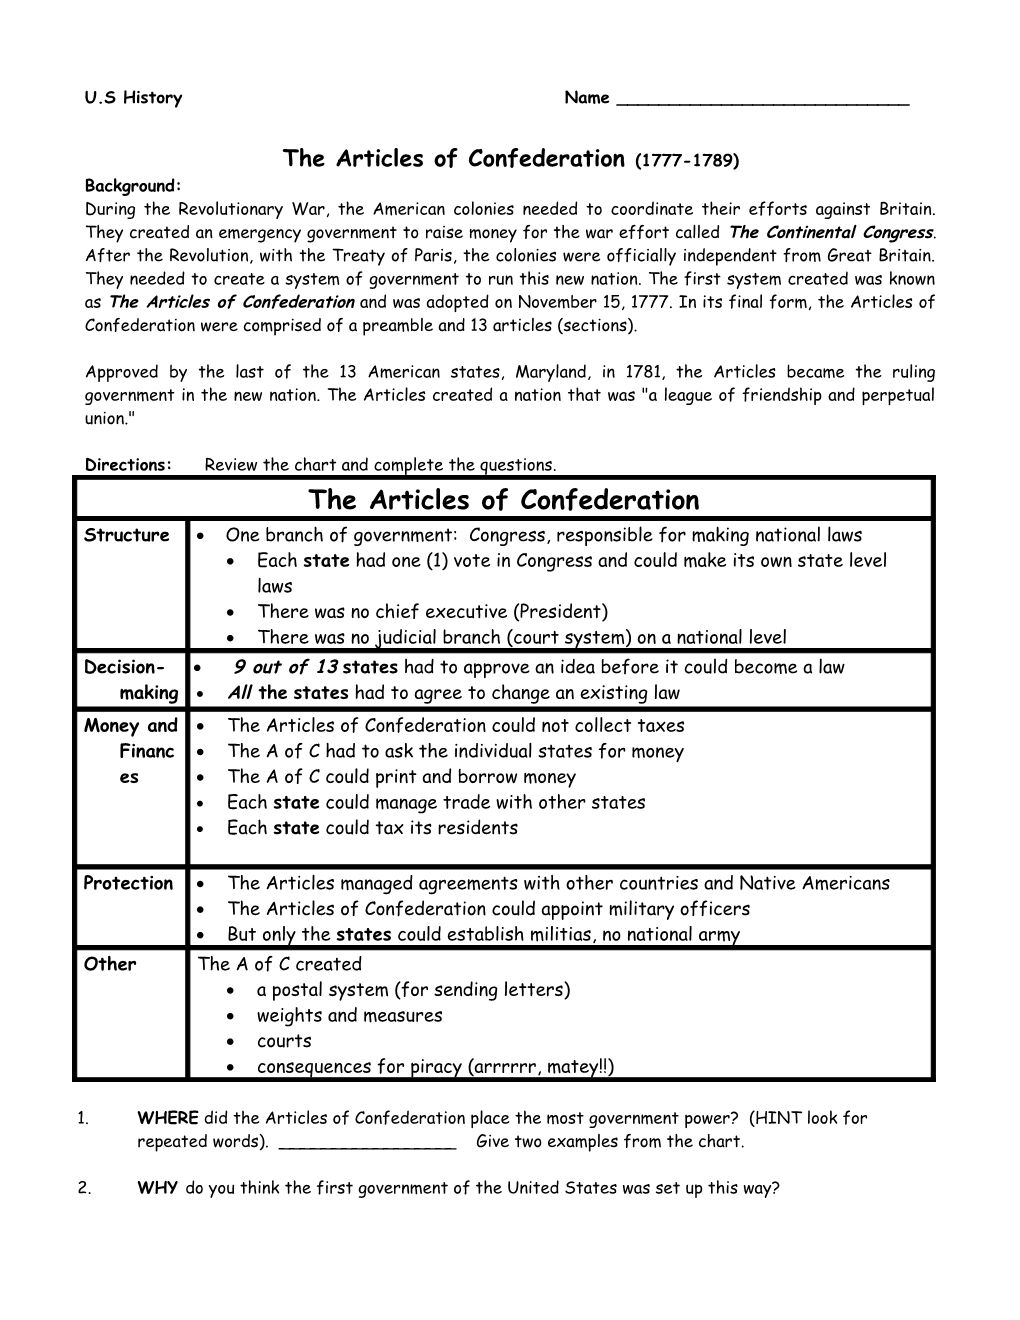 The Articles of Confederation s1